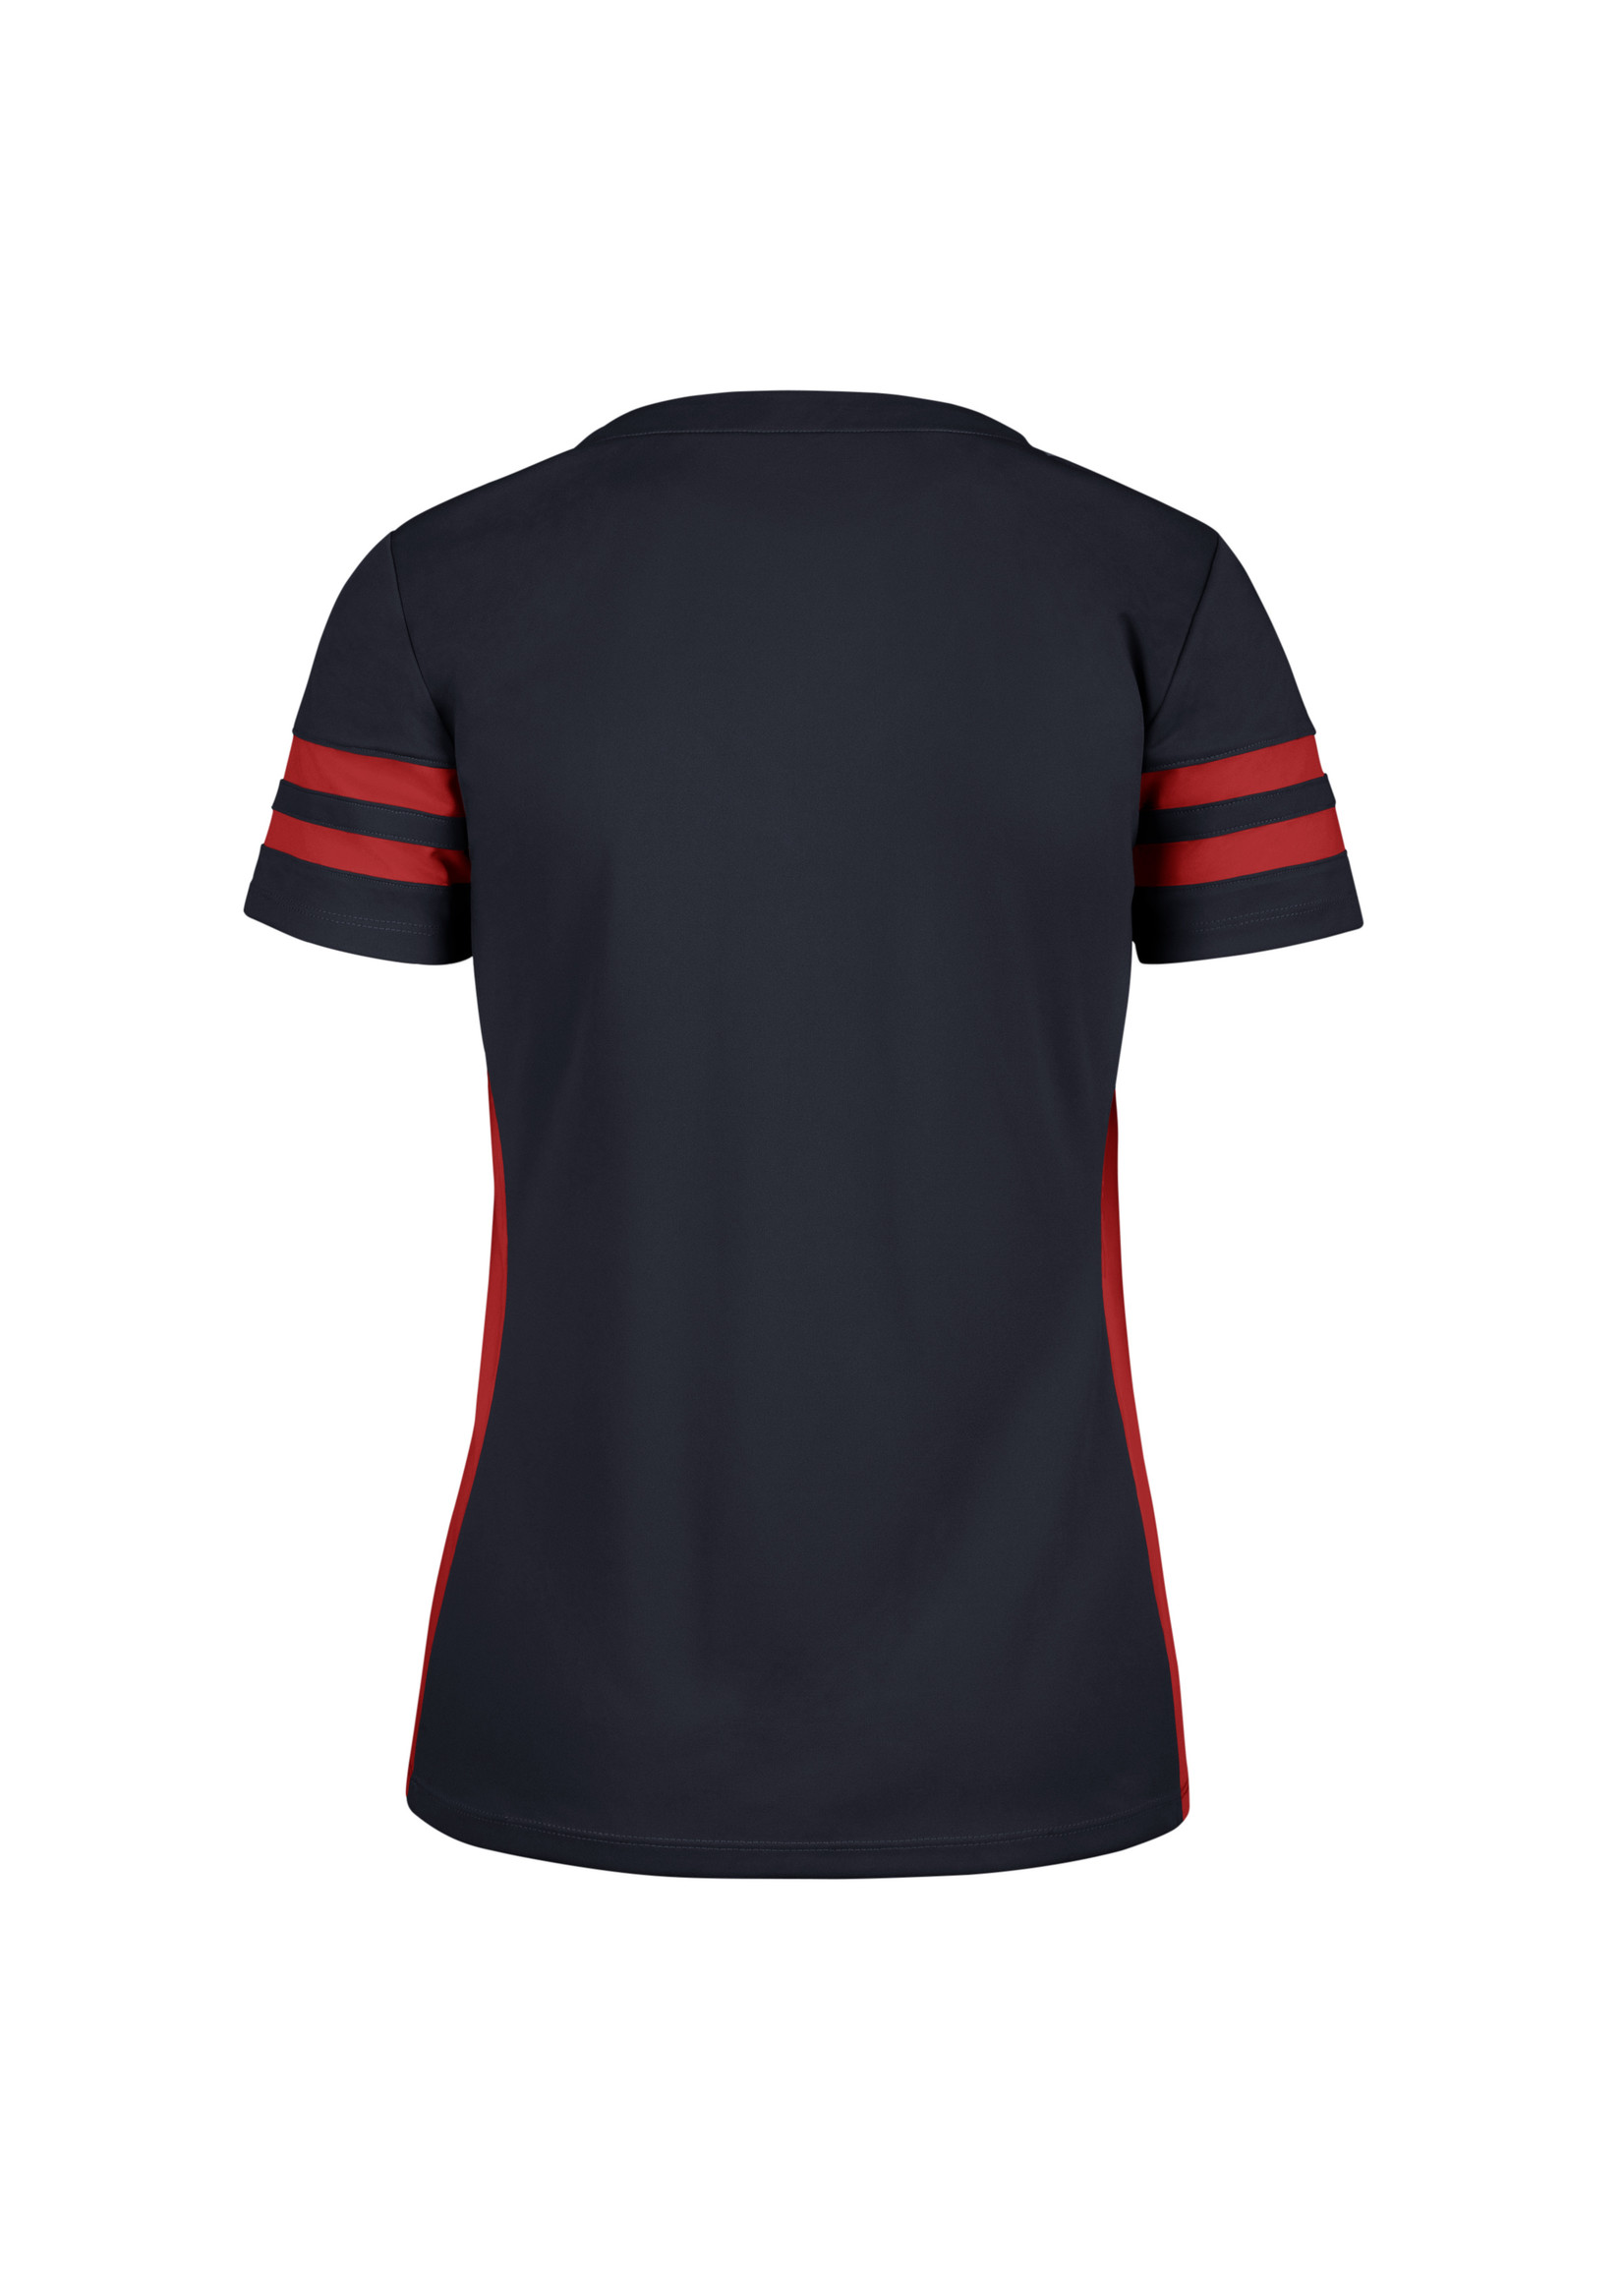 '47 Brand '47 Brand Red Sox Women's Laced Shirt